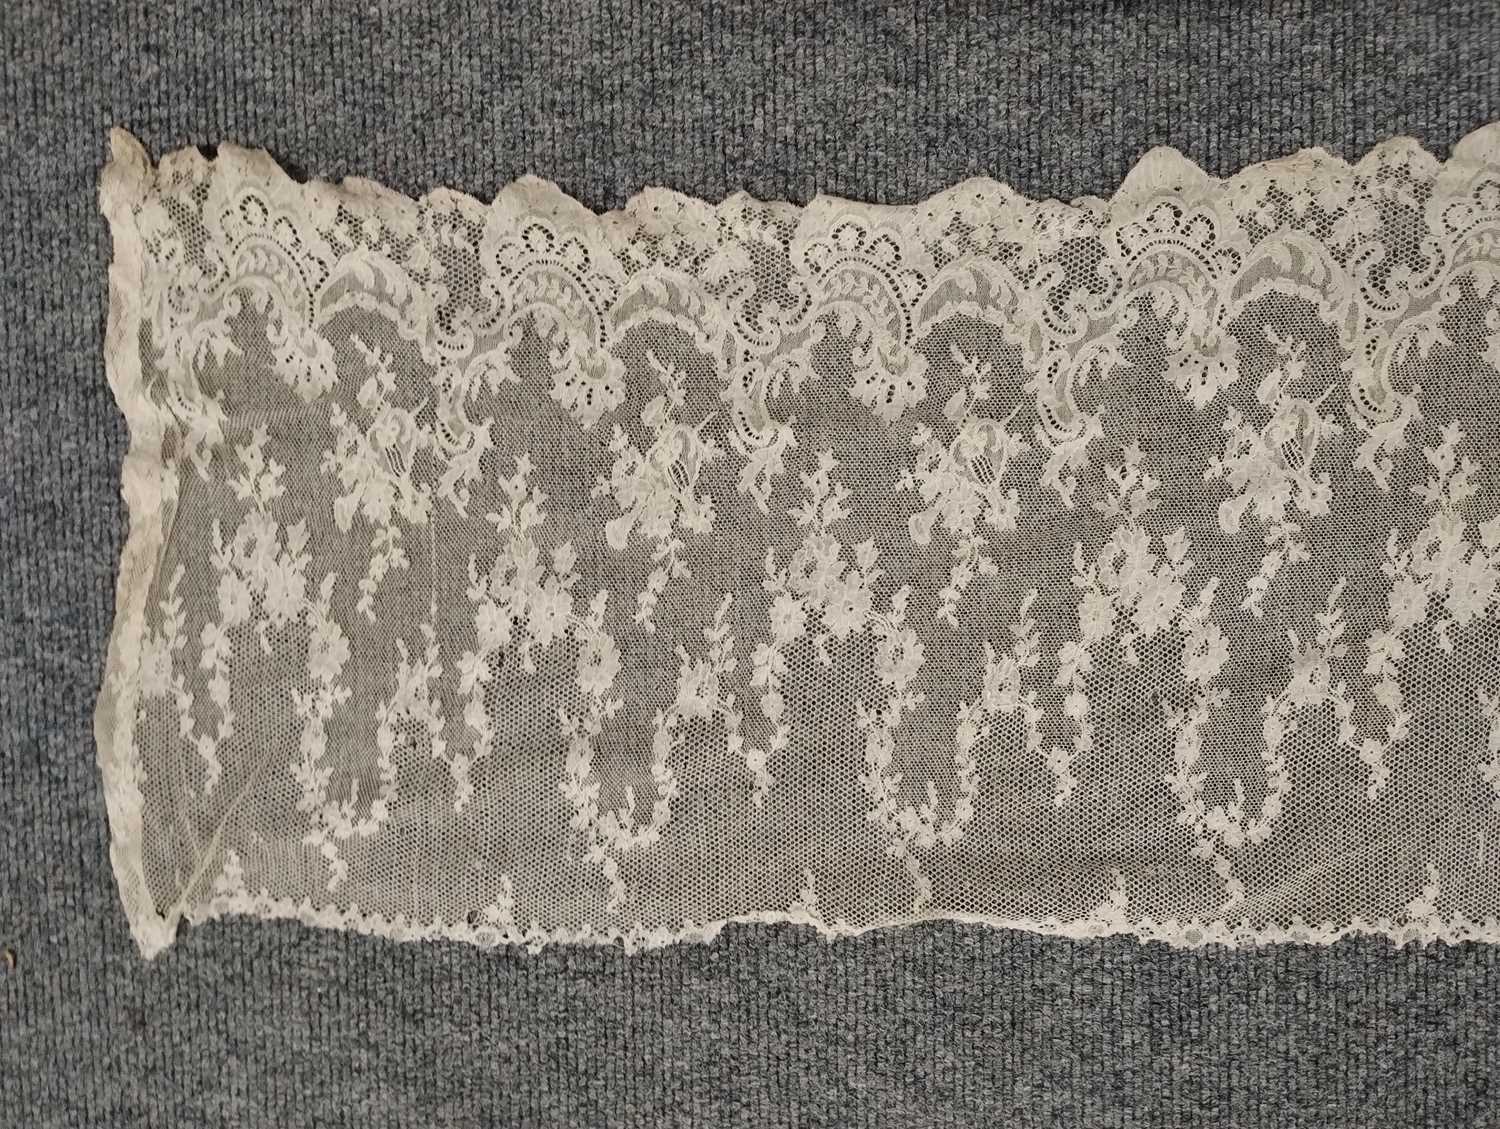 Early 20th Century Lace comprising a flounce with appliquéd flower heads and motifs within a - Image 9 of 32